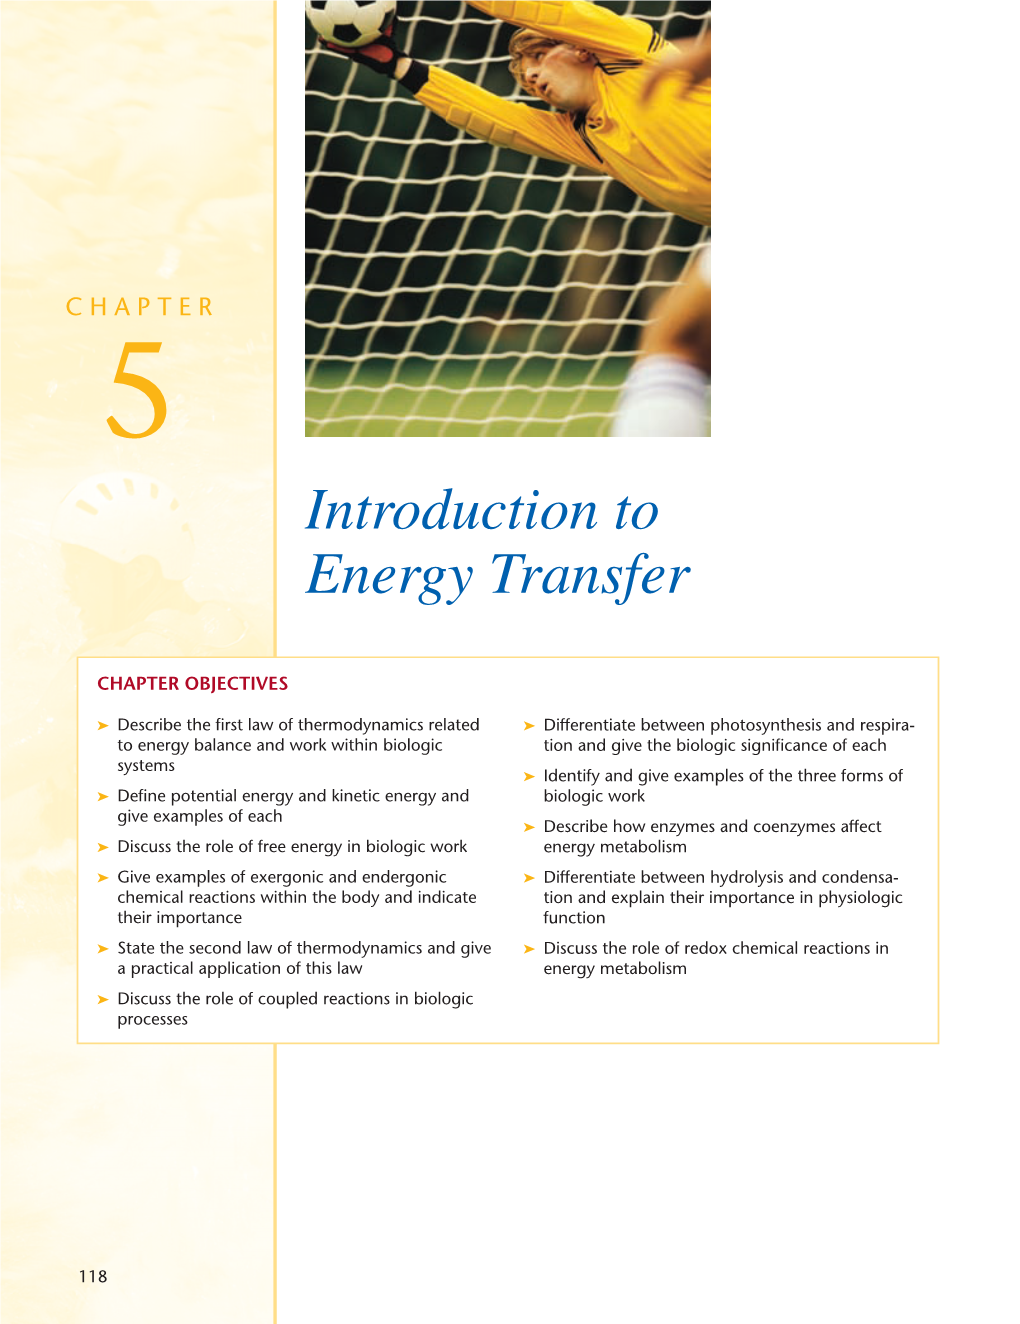 Introduction to Energy Transfer